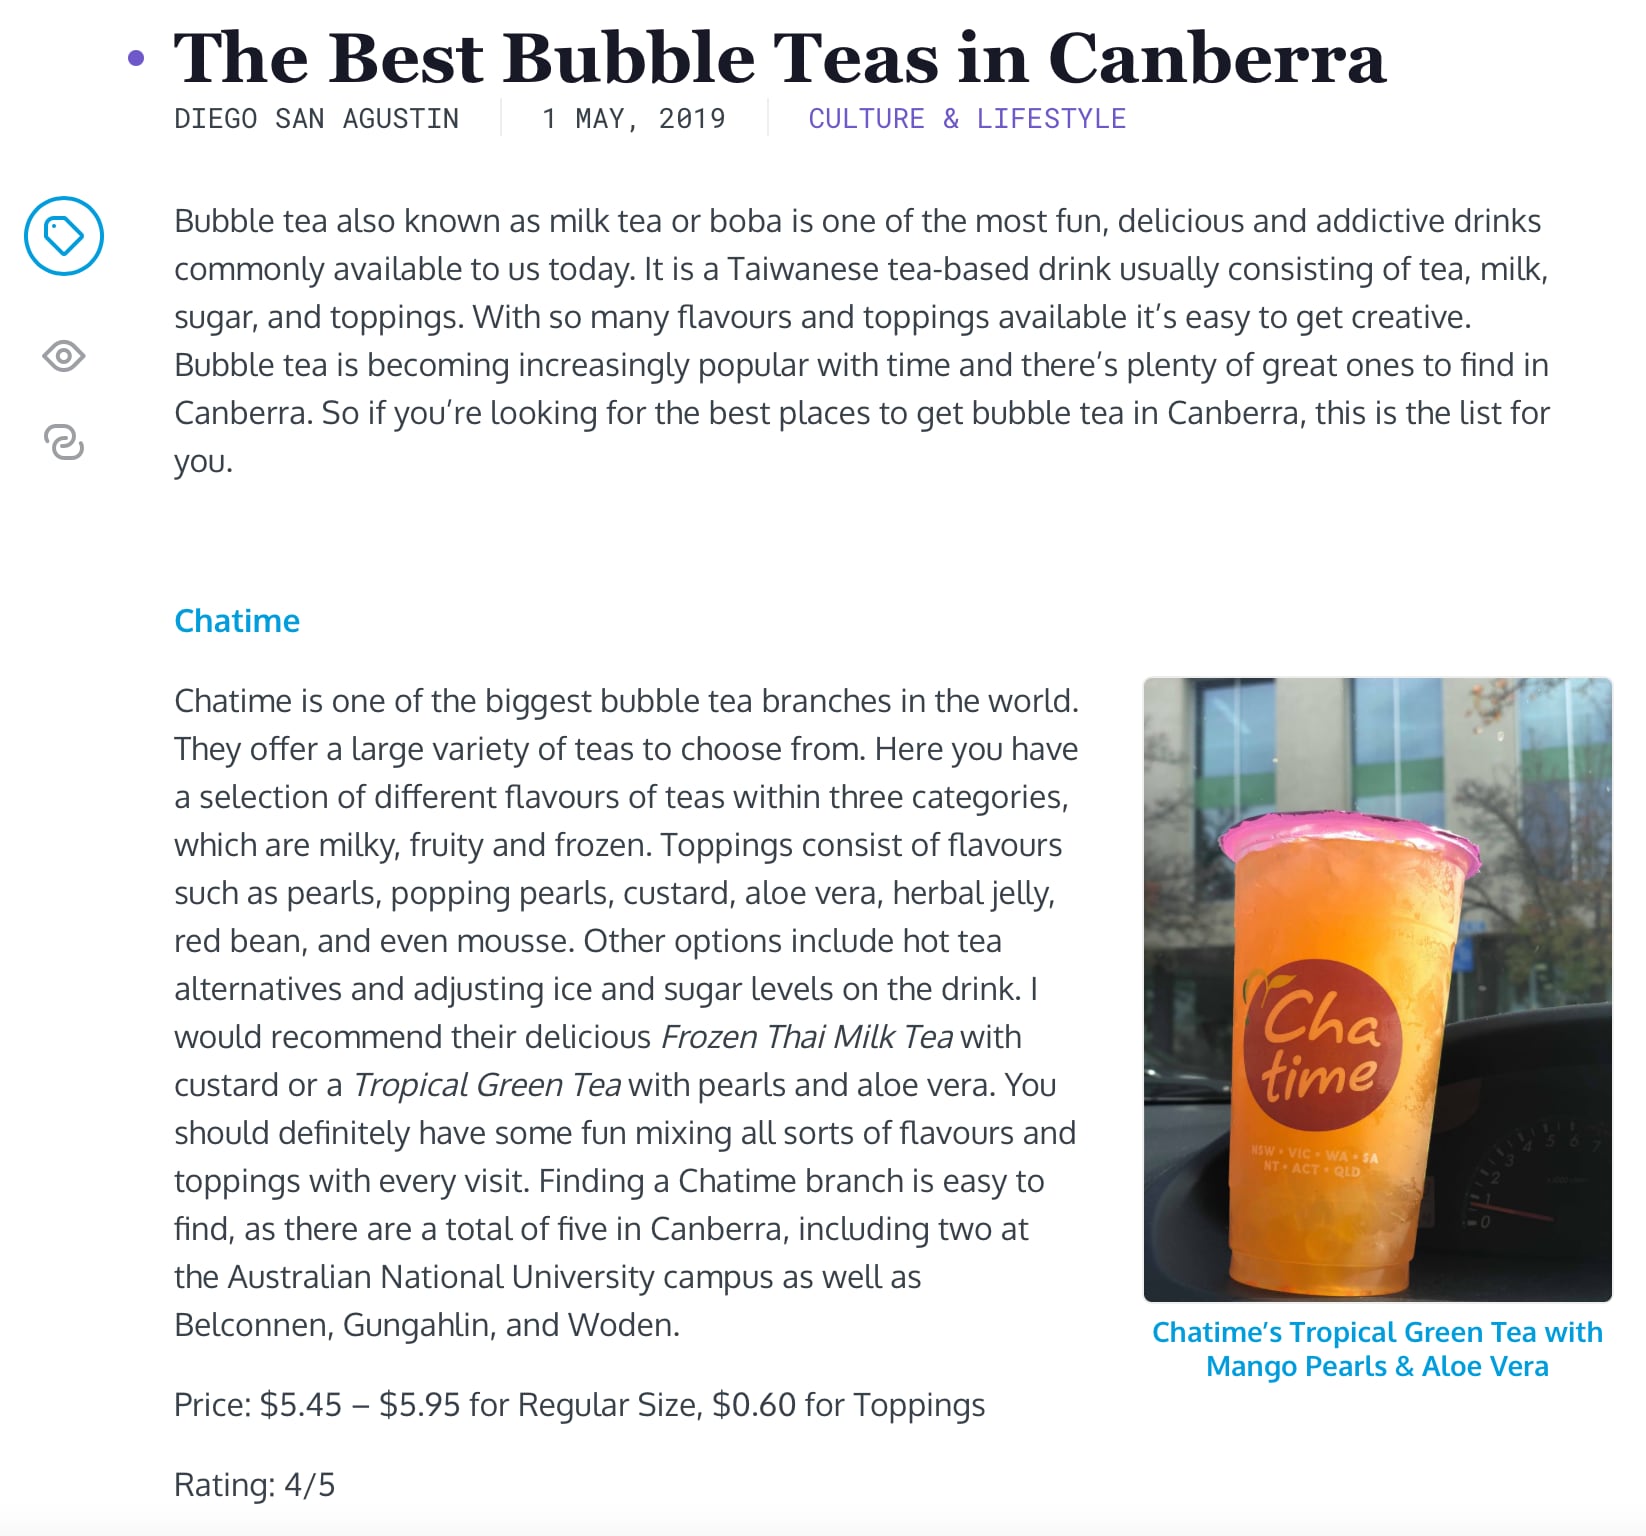 Screenshot of 'The Best Bubble Teas in Canberra'